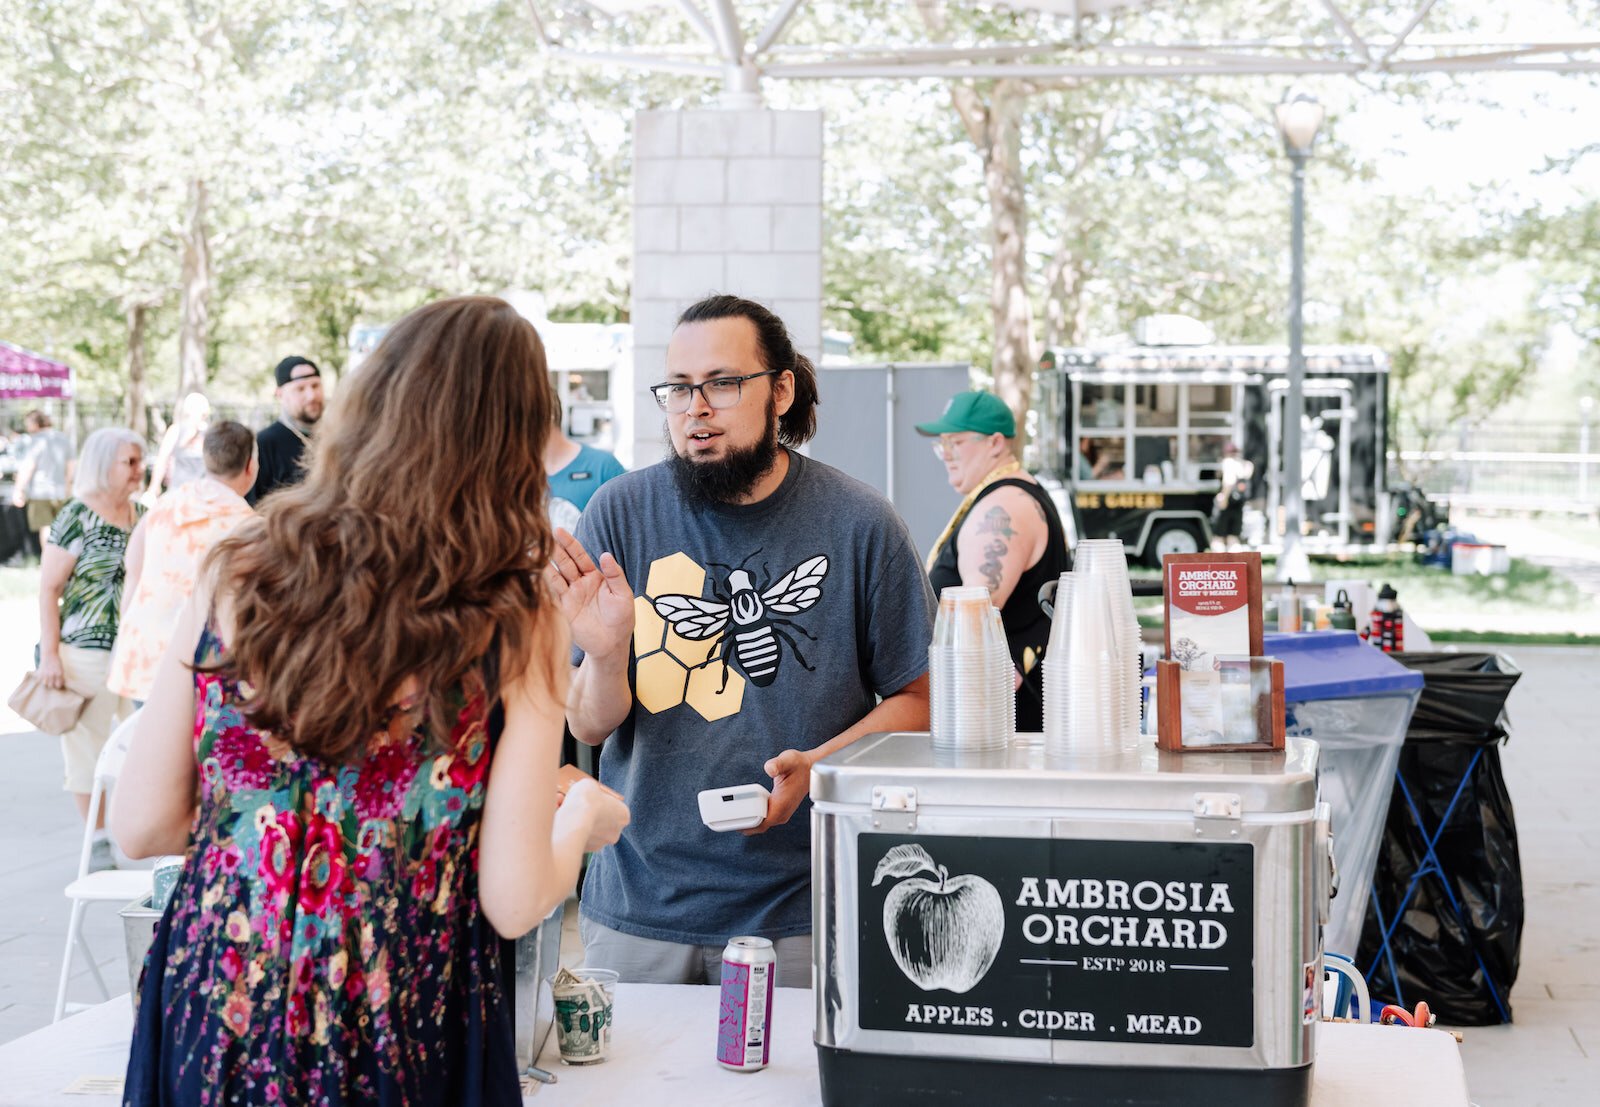 Ambrosia Orchard at Eco Fest in 2022.